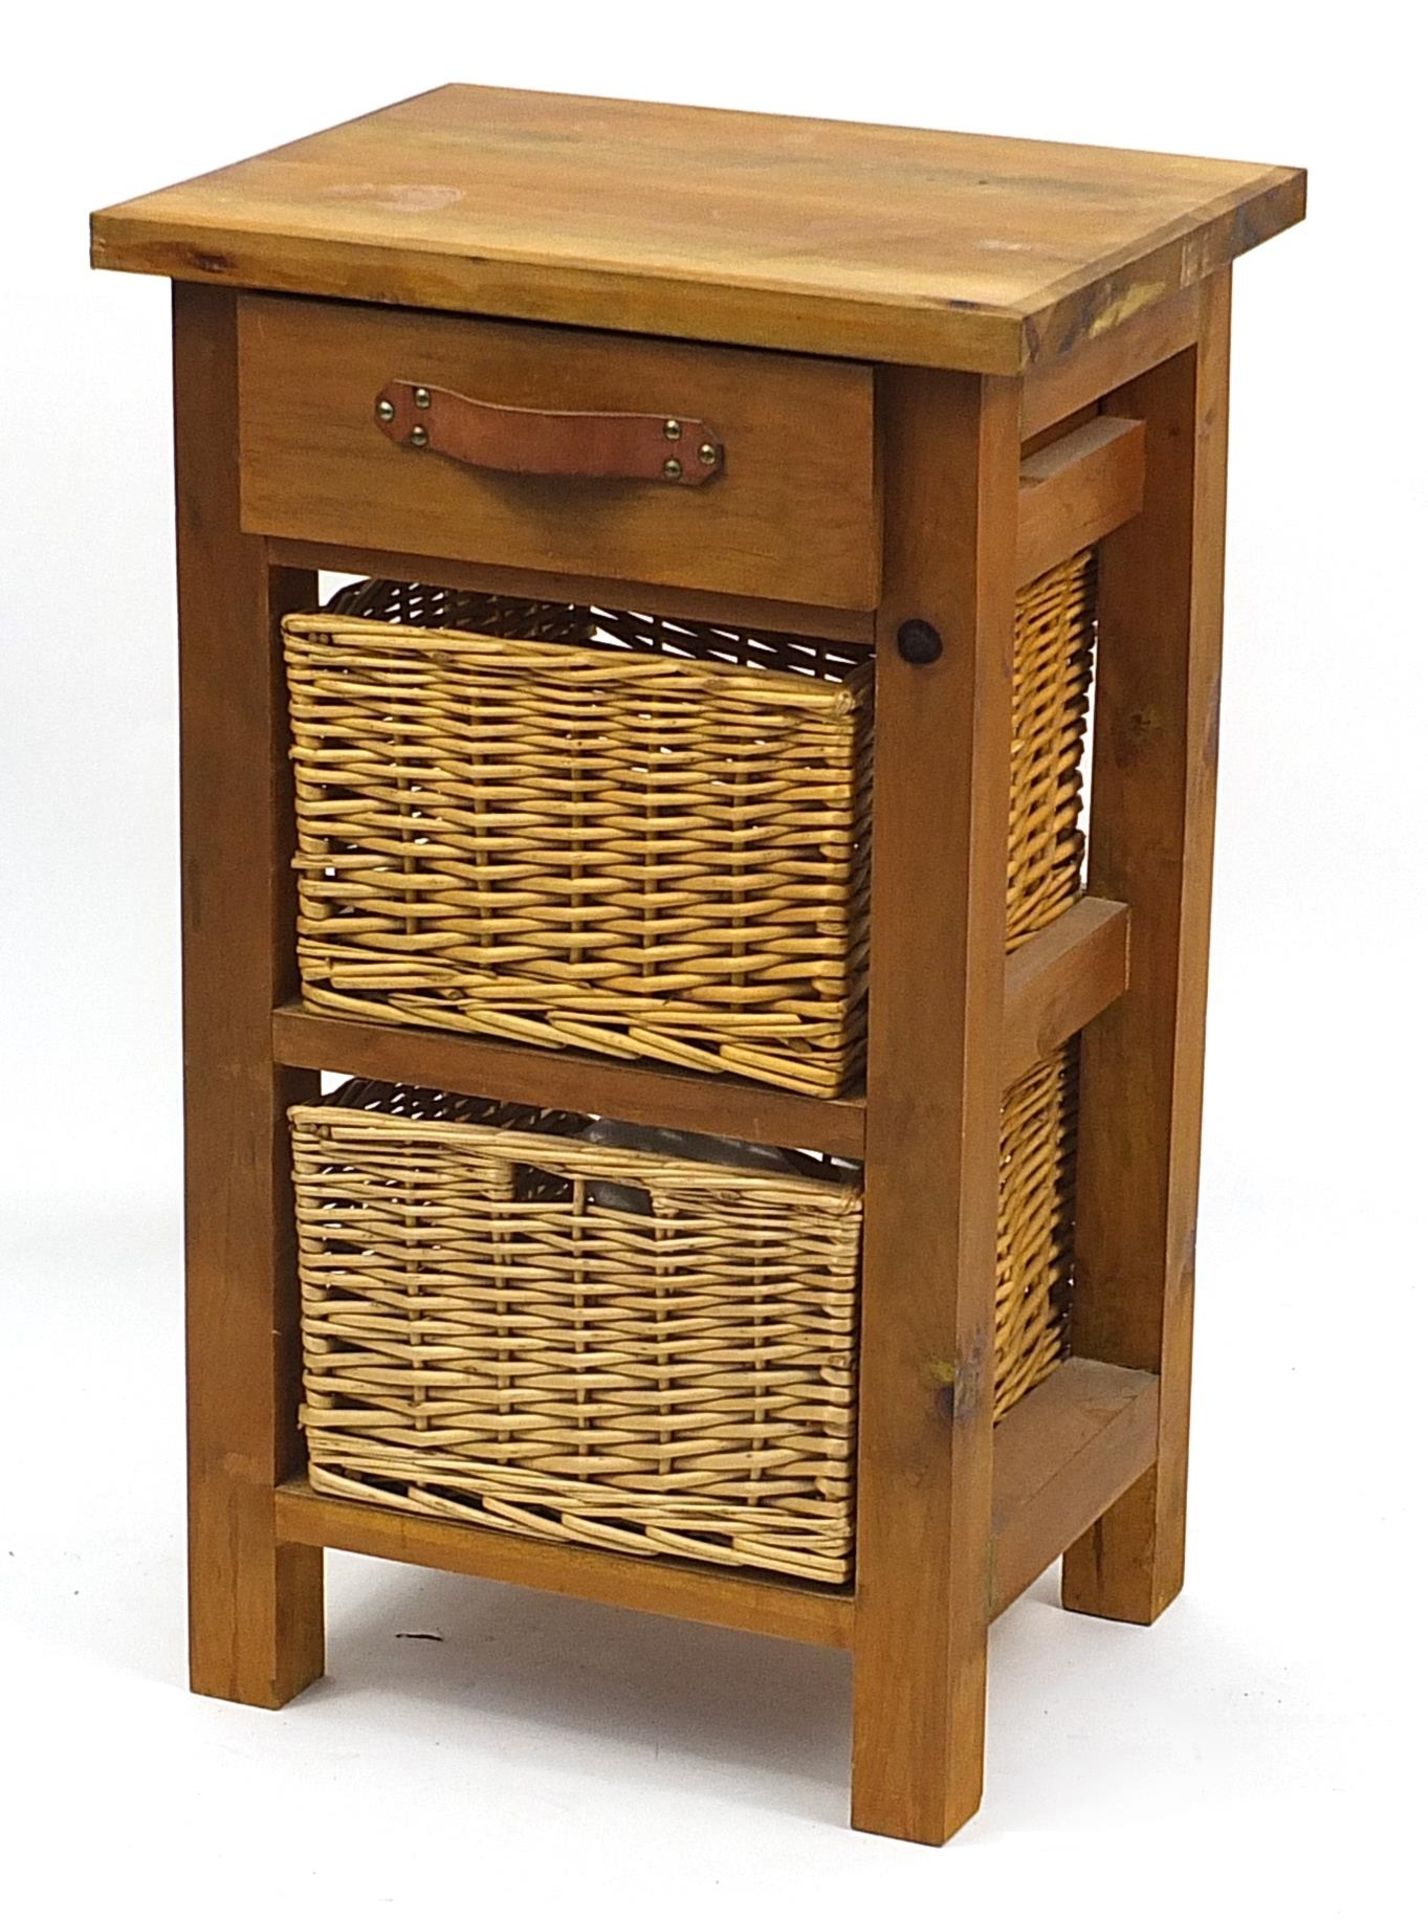 Pine side table with drawer and two wicker baskets, 80cm H x 50cm W x 40cm D